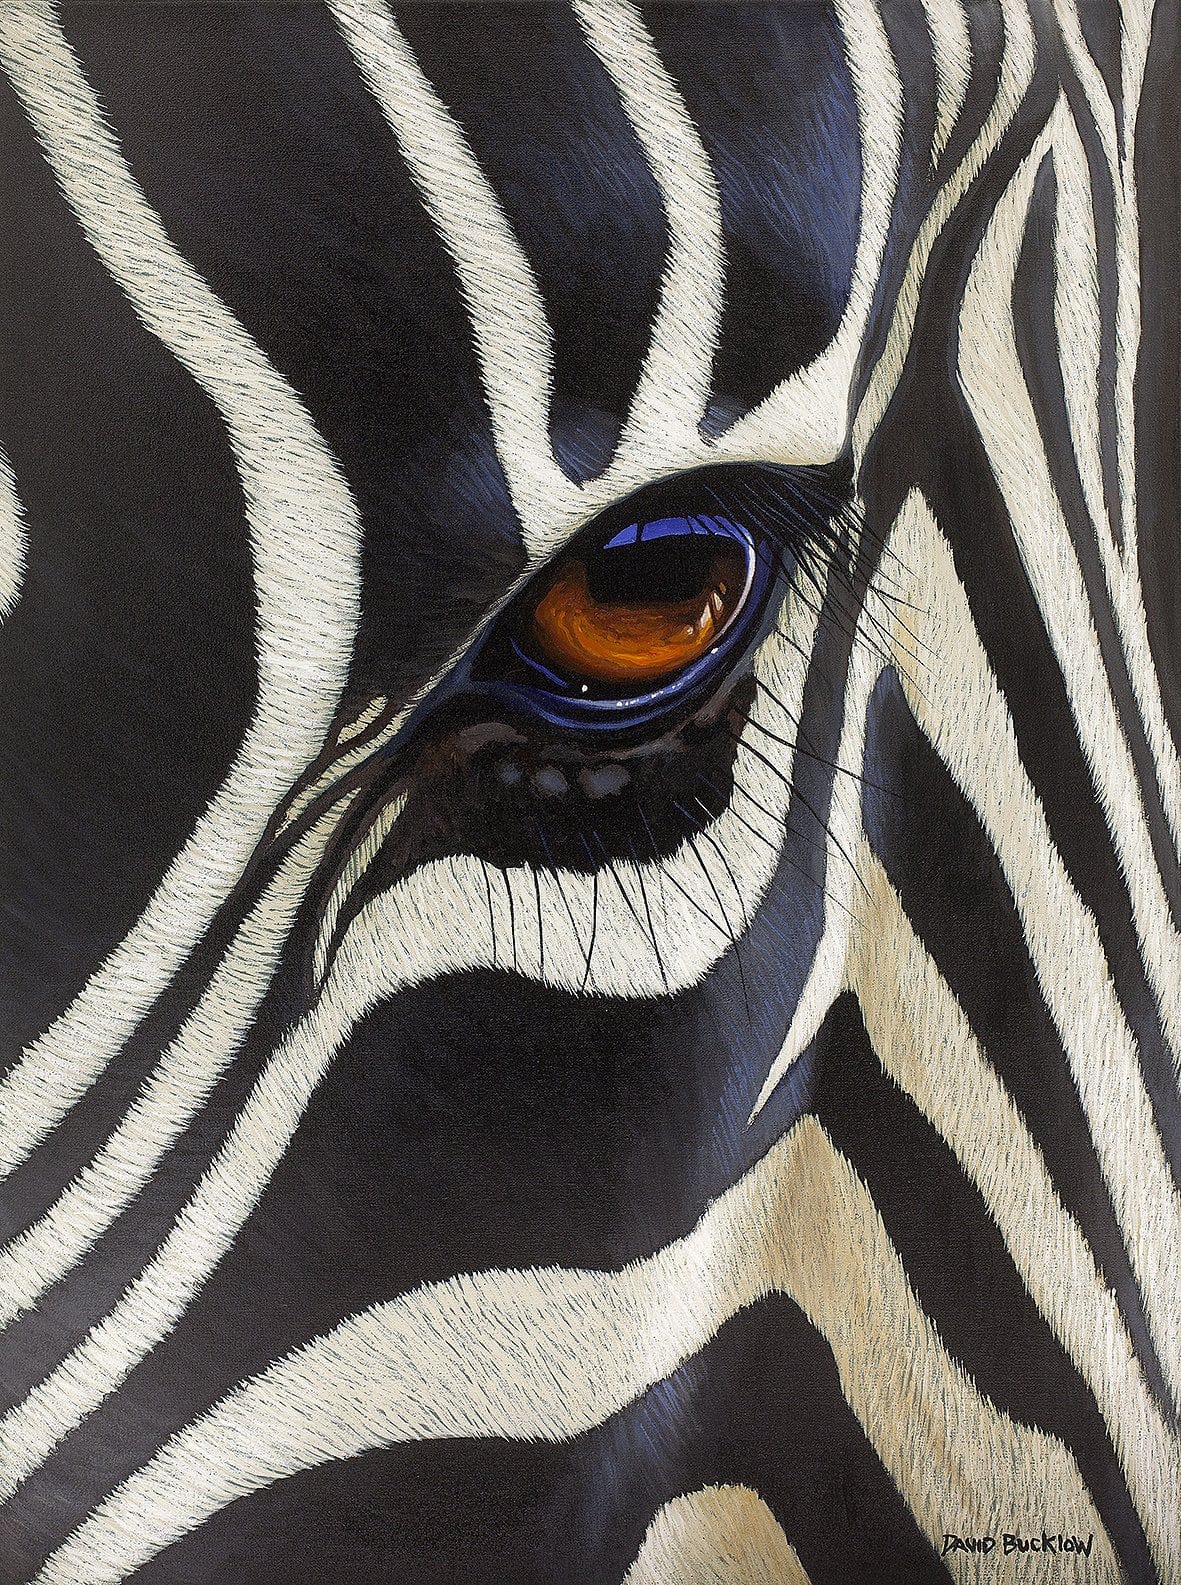 A wildlife print of a Zebra up close showing the Zebra's eye by artist David Bucklow entitled Eye of the Beholder